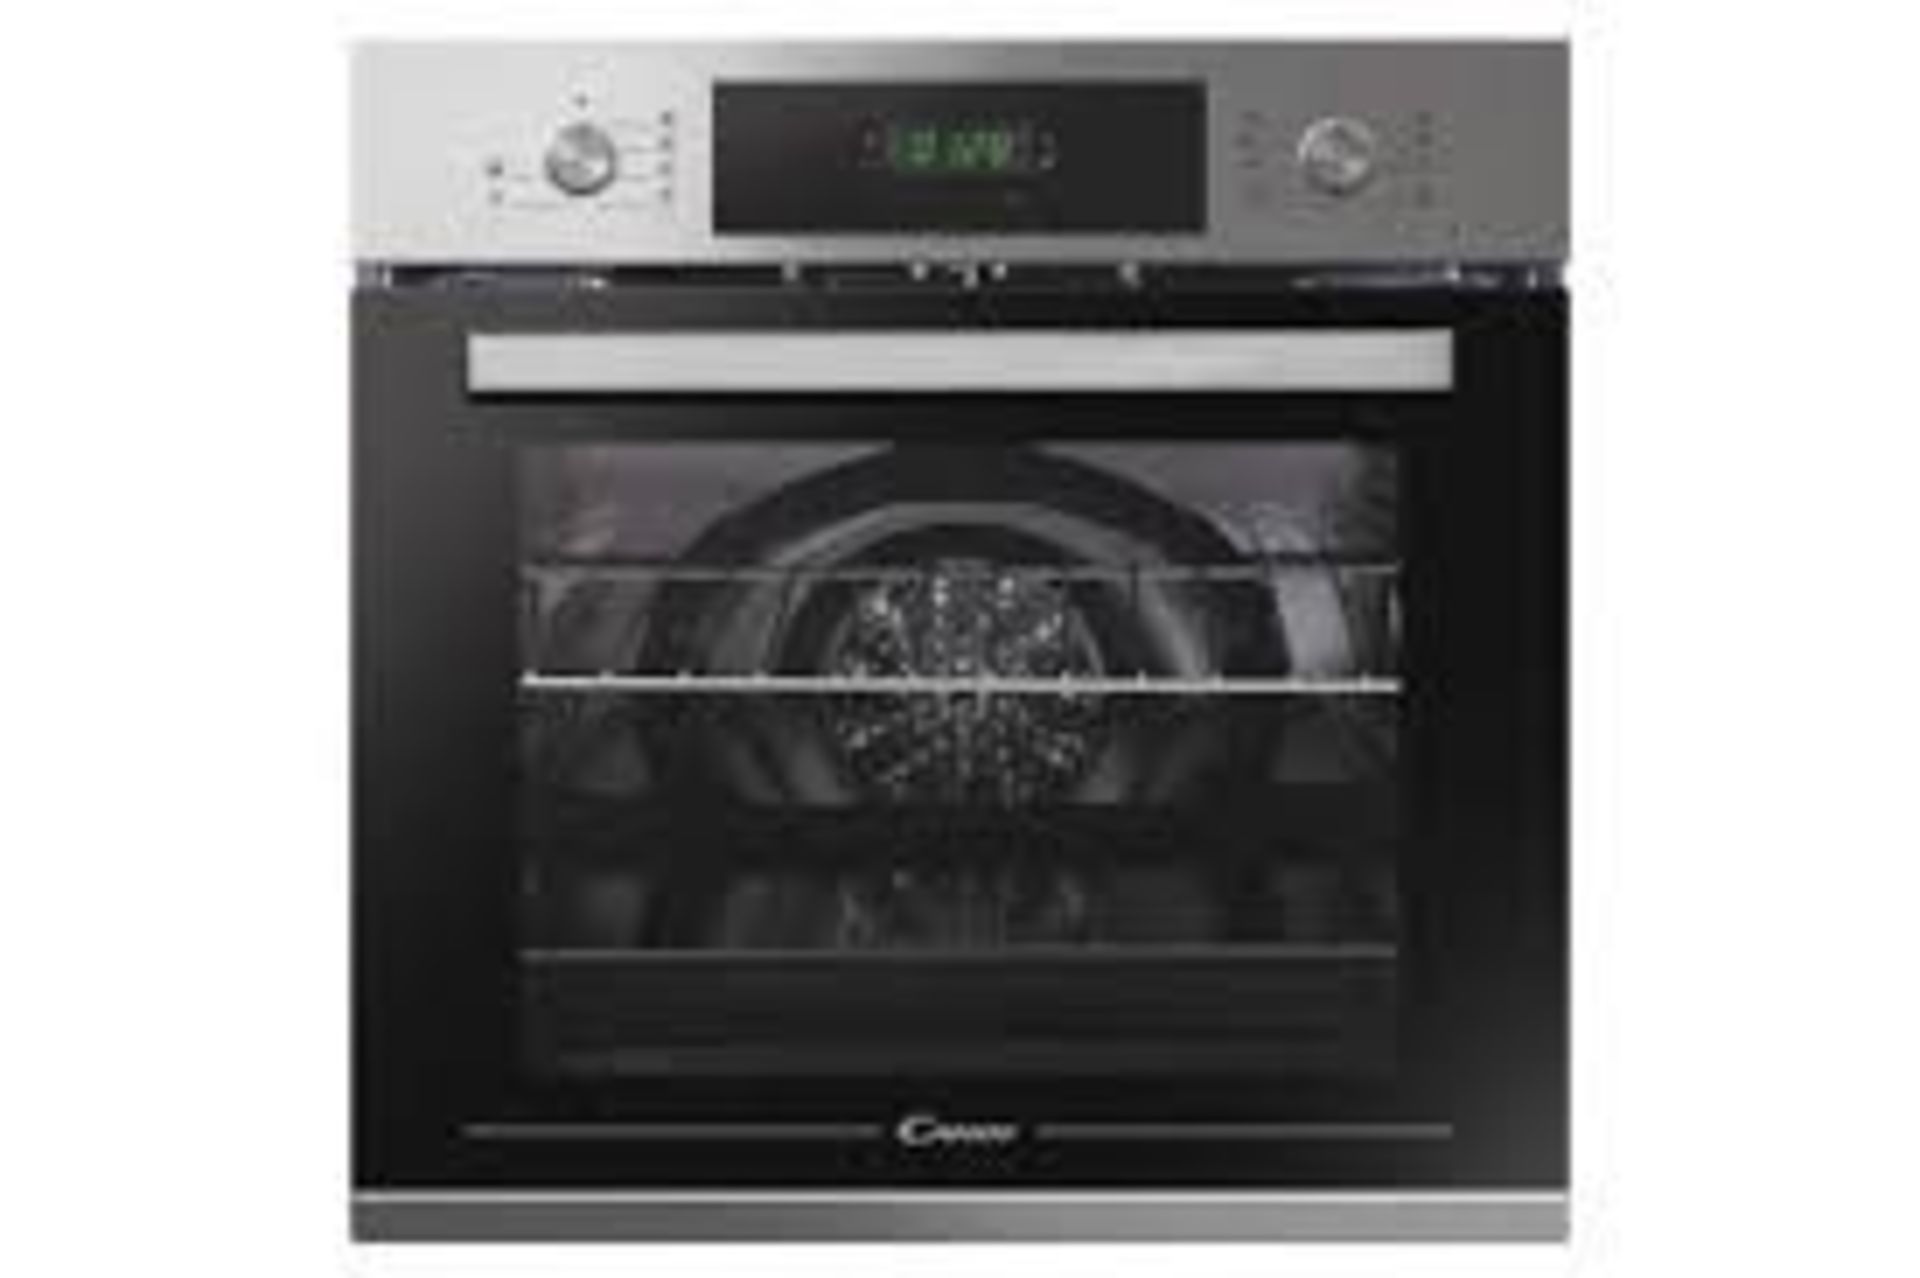 dCandy Integrated Single Pyrolytic Oven Stainless Steel - FCTK626XL. - R13a.12. A 60cm Multifunction